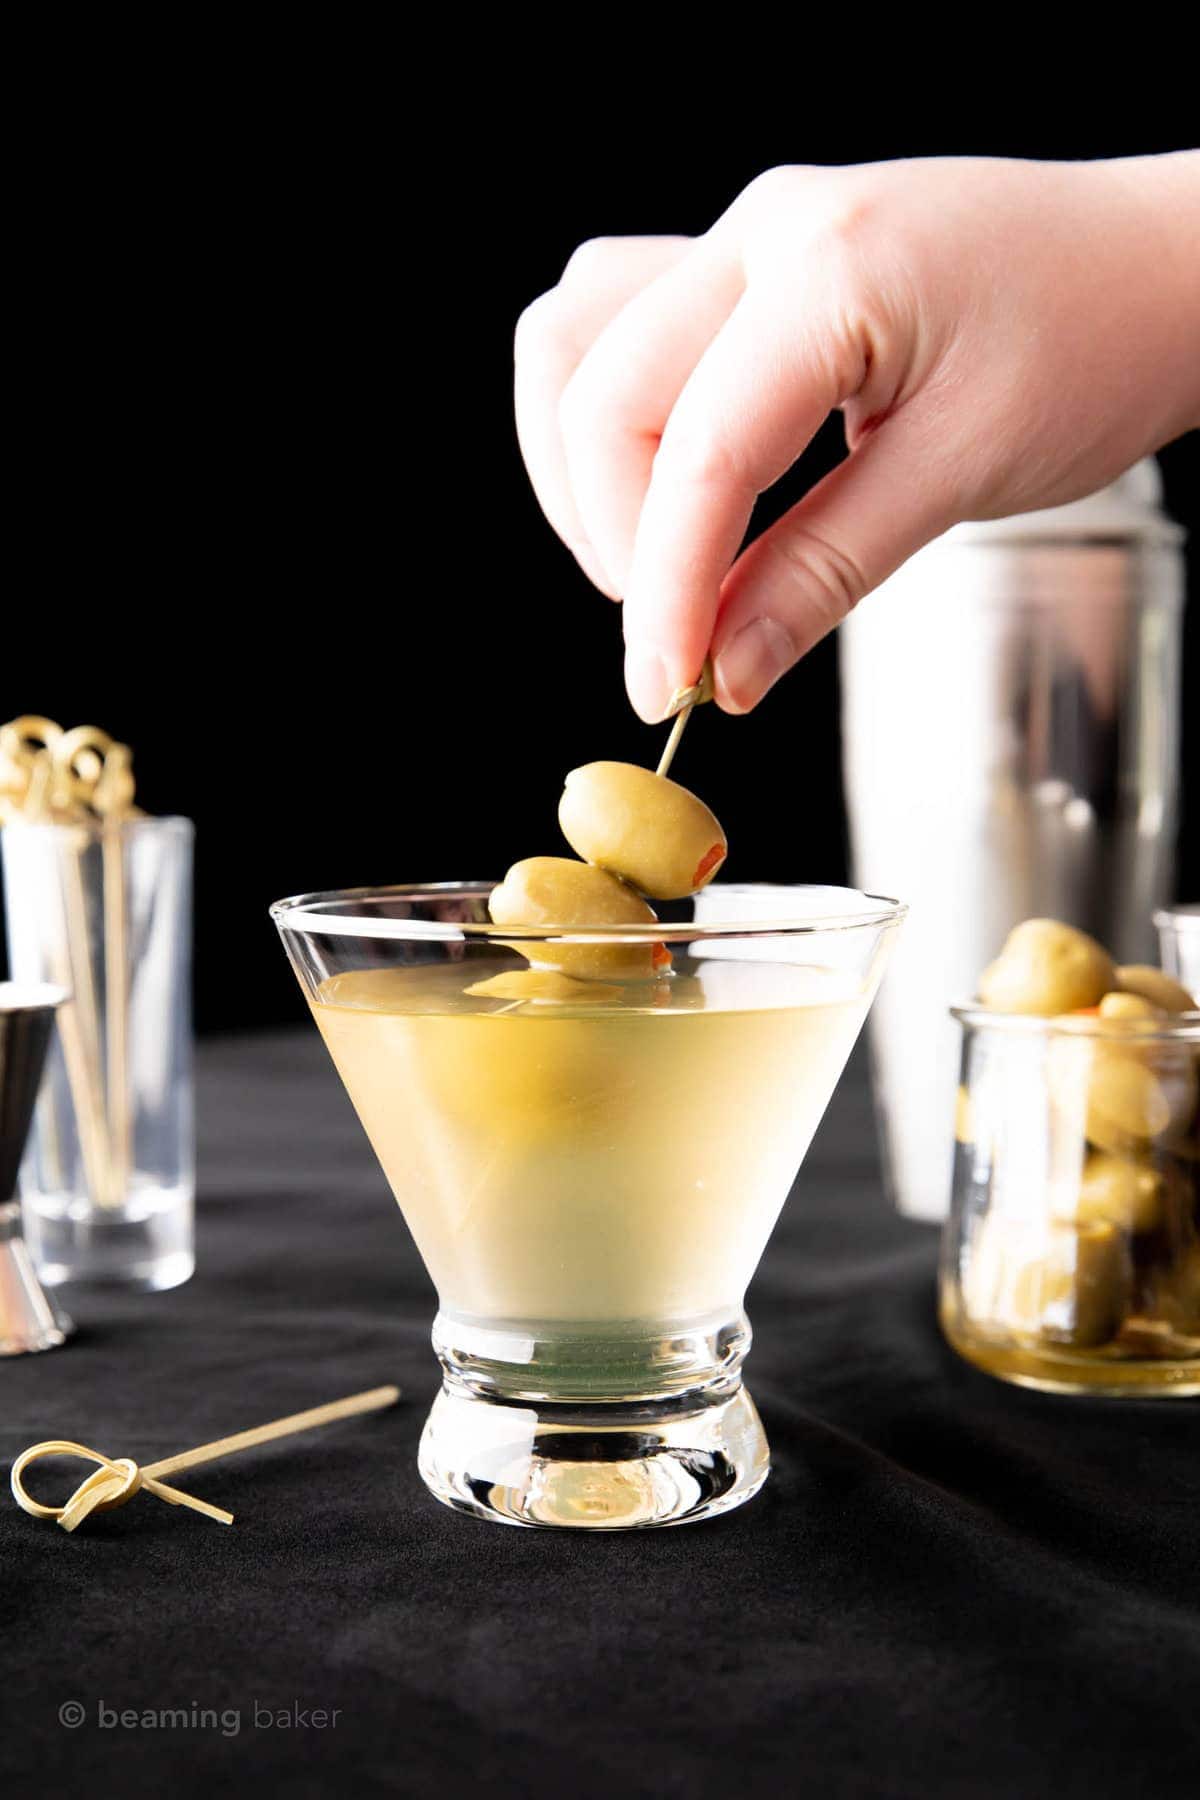 hand holding olive skewer that's nearly submerged in the cocktail